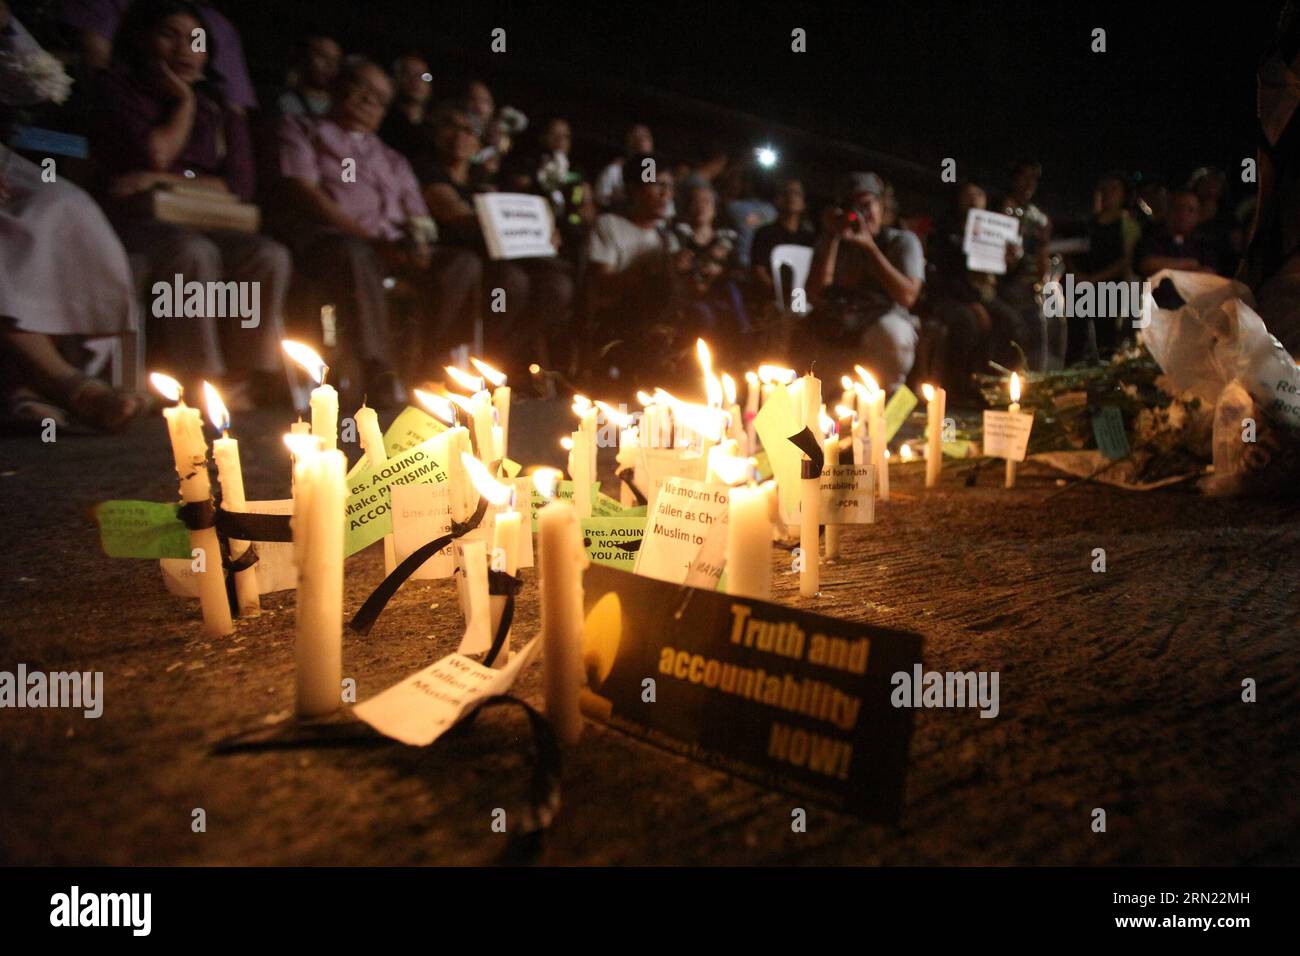 (150203) -- QUEZON CITY, Feb. 3, 2015 -- People light candles and offer flowers and prayers for the slain 49 members of the Philippine National Police Special Action Force(PNP-SAF) at the gate of the PNP Headquarters in Quezon City, the Philippines, Feb. 3, 2015. There was lack of coordination and planning between the military forces and the leadership of the PNP-SAF during the violent clash in Mamasapano, Maguindanao on Jan. 25, chief of the Armed Forces of the Philippines said on Tuesday. ) (lmz) PHILIPPINES-QUEZON CITY-CANDLE LIGHTING RouellexUmali PUBLICATIONxNOTxINxCHN   Quezon City Feb 3 Stock Photo